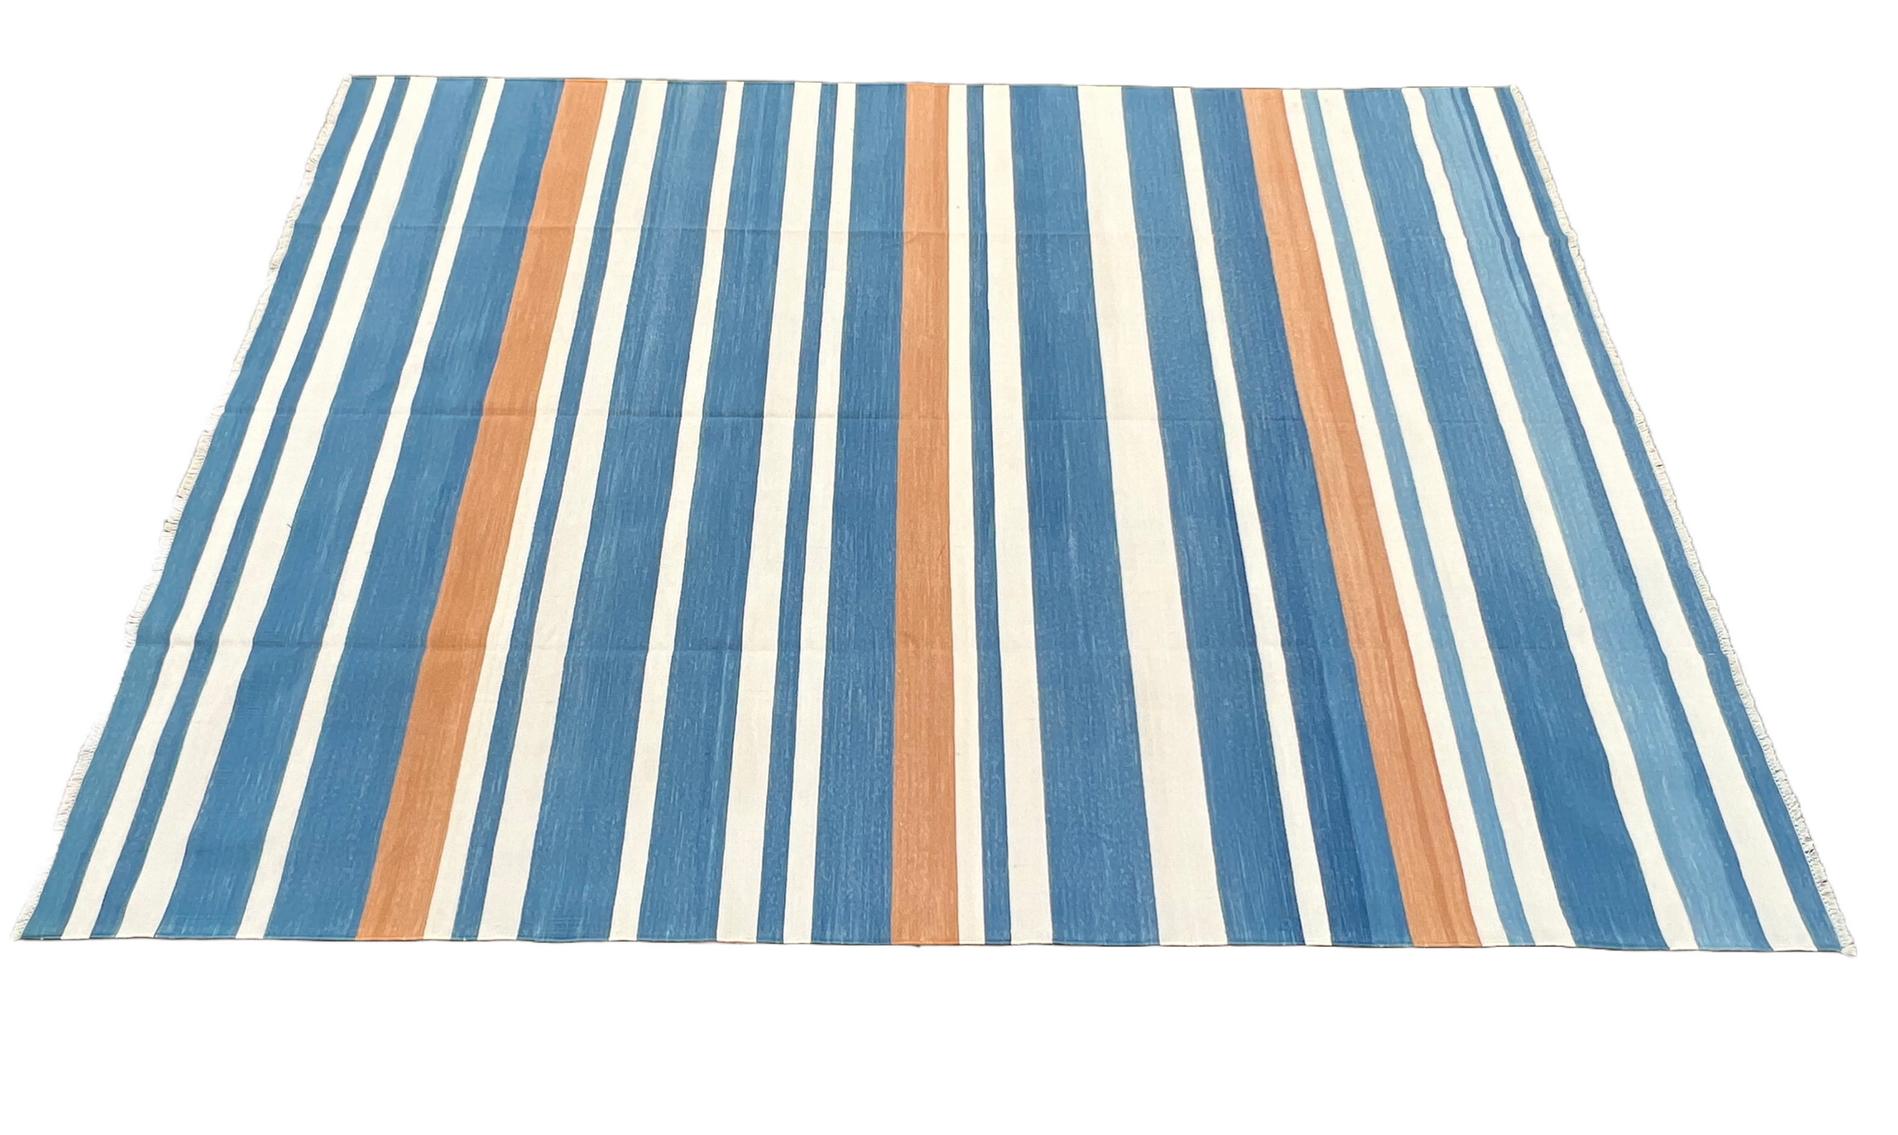 Mid-Century Modern Handmade Cotton Area Flat Weave Rug, 8x10 Blue And White Striped Indian Dhurrie For Sale